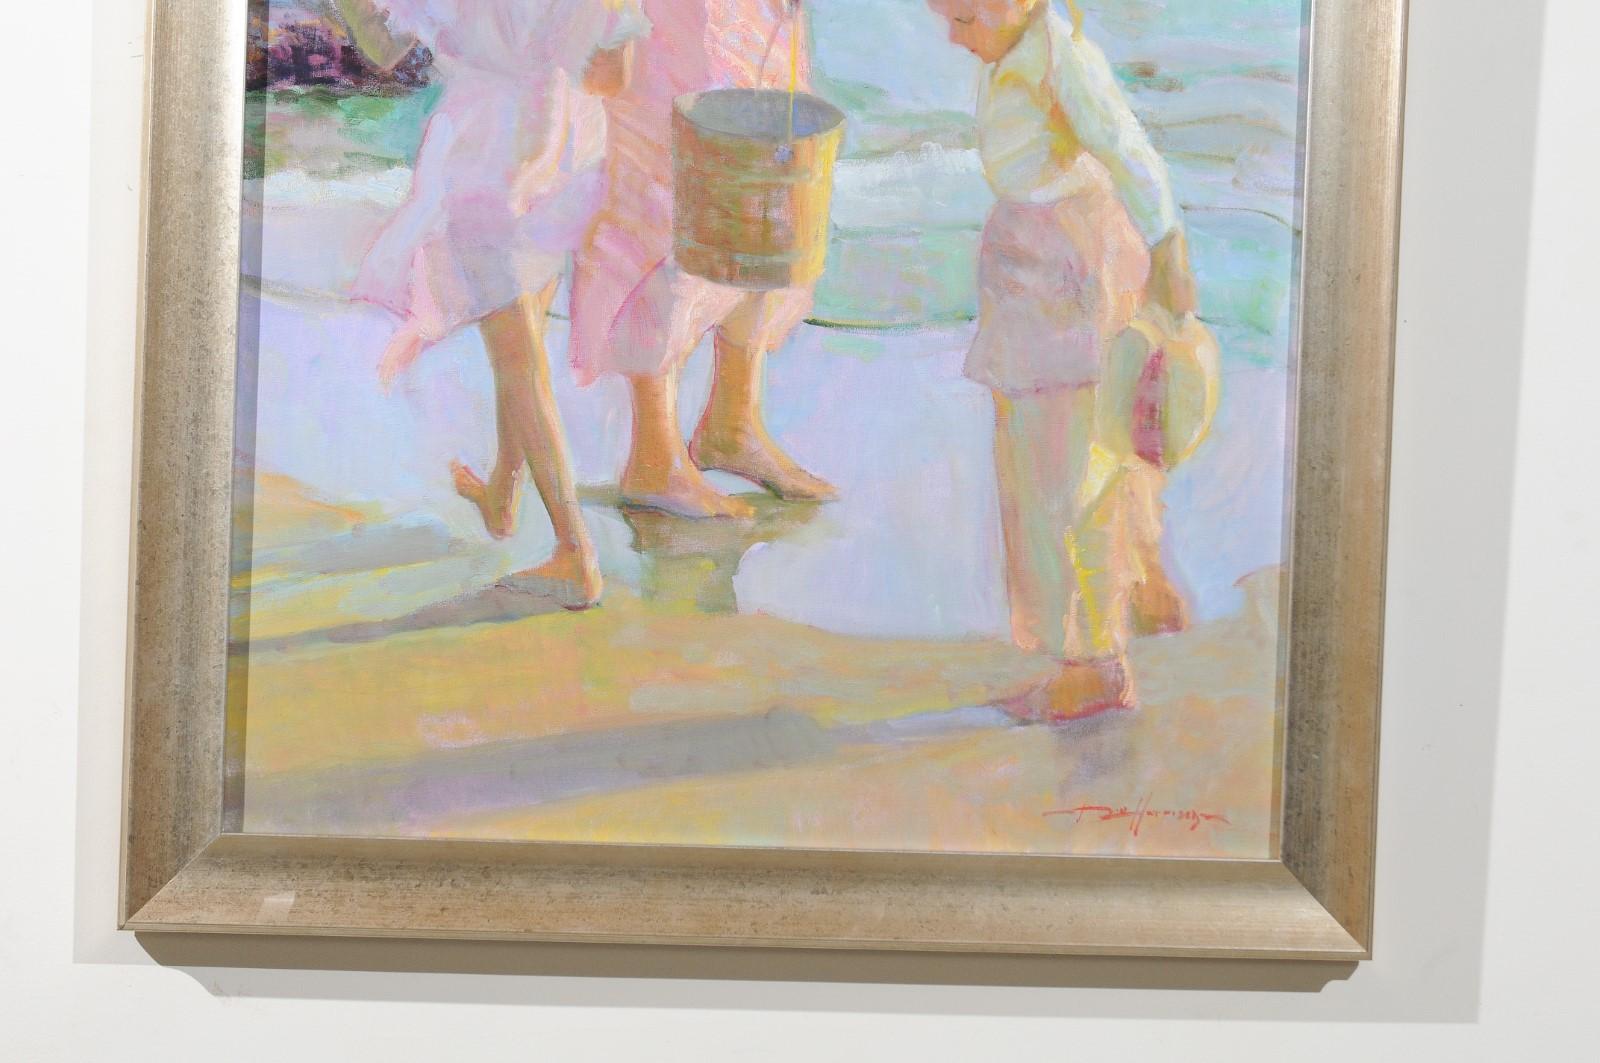 Daughters by Don Hatfield, Vertical Contemporary Framed Beach Scene Painting 1